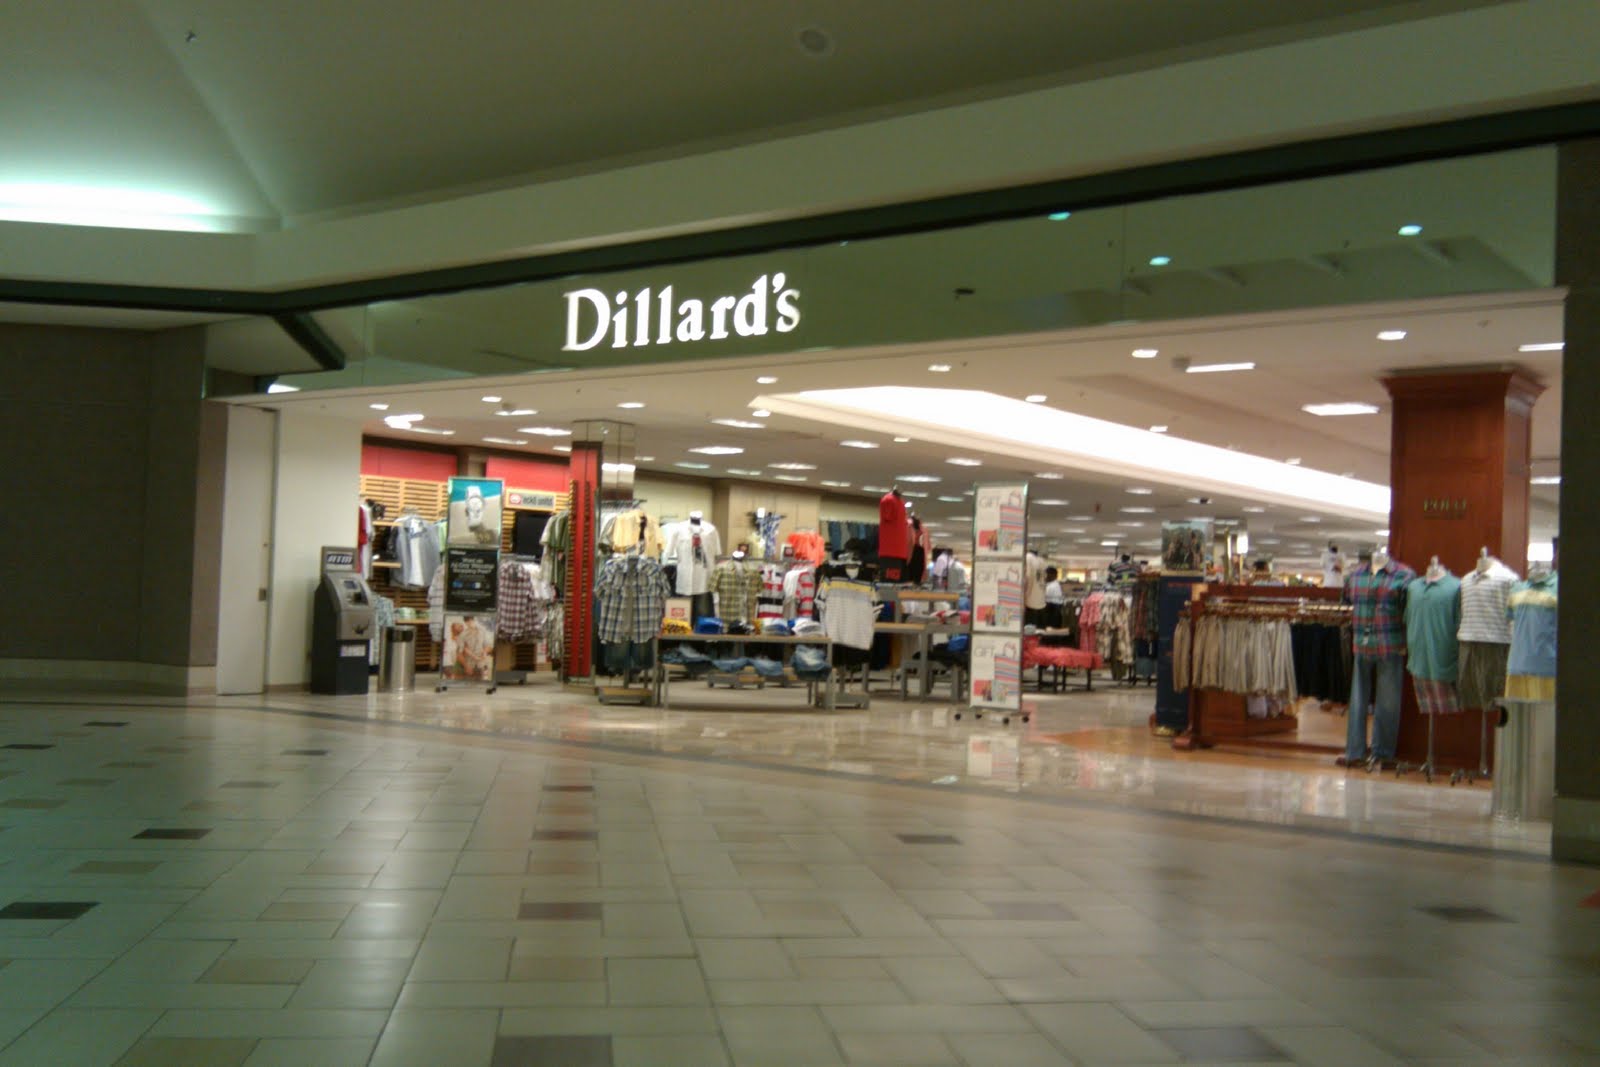 This Dillards entrance is near the food court.